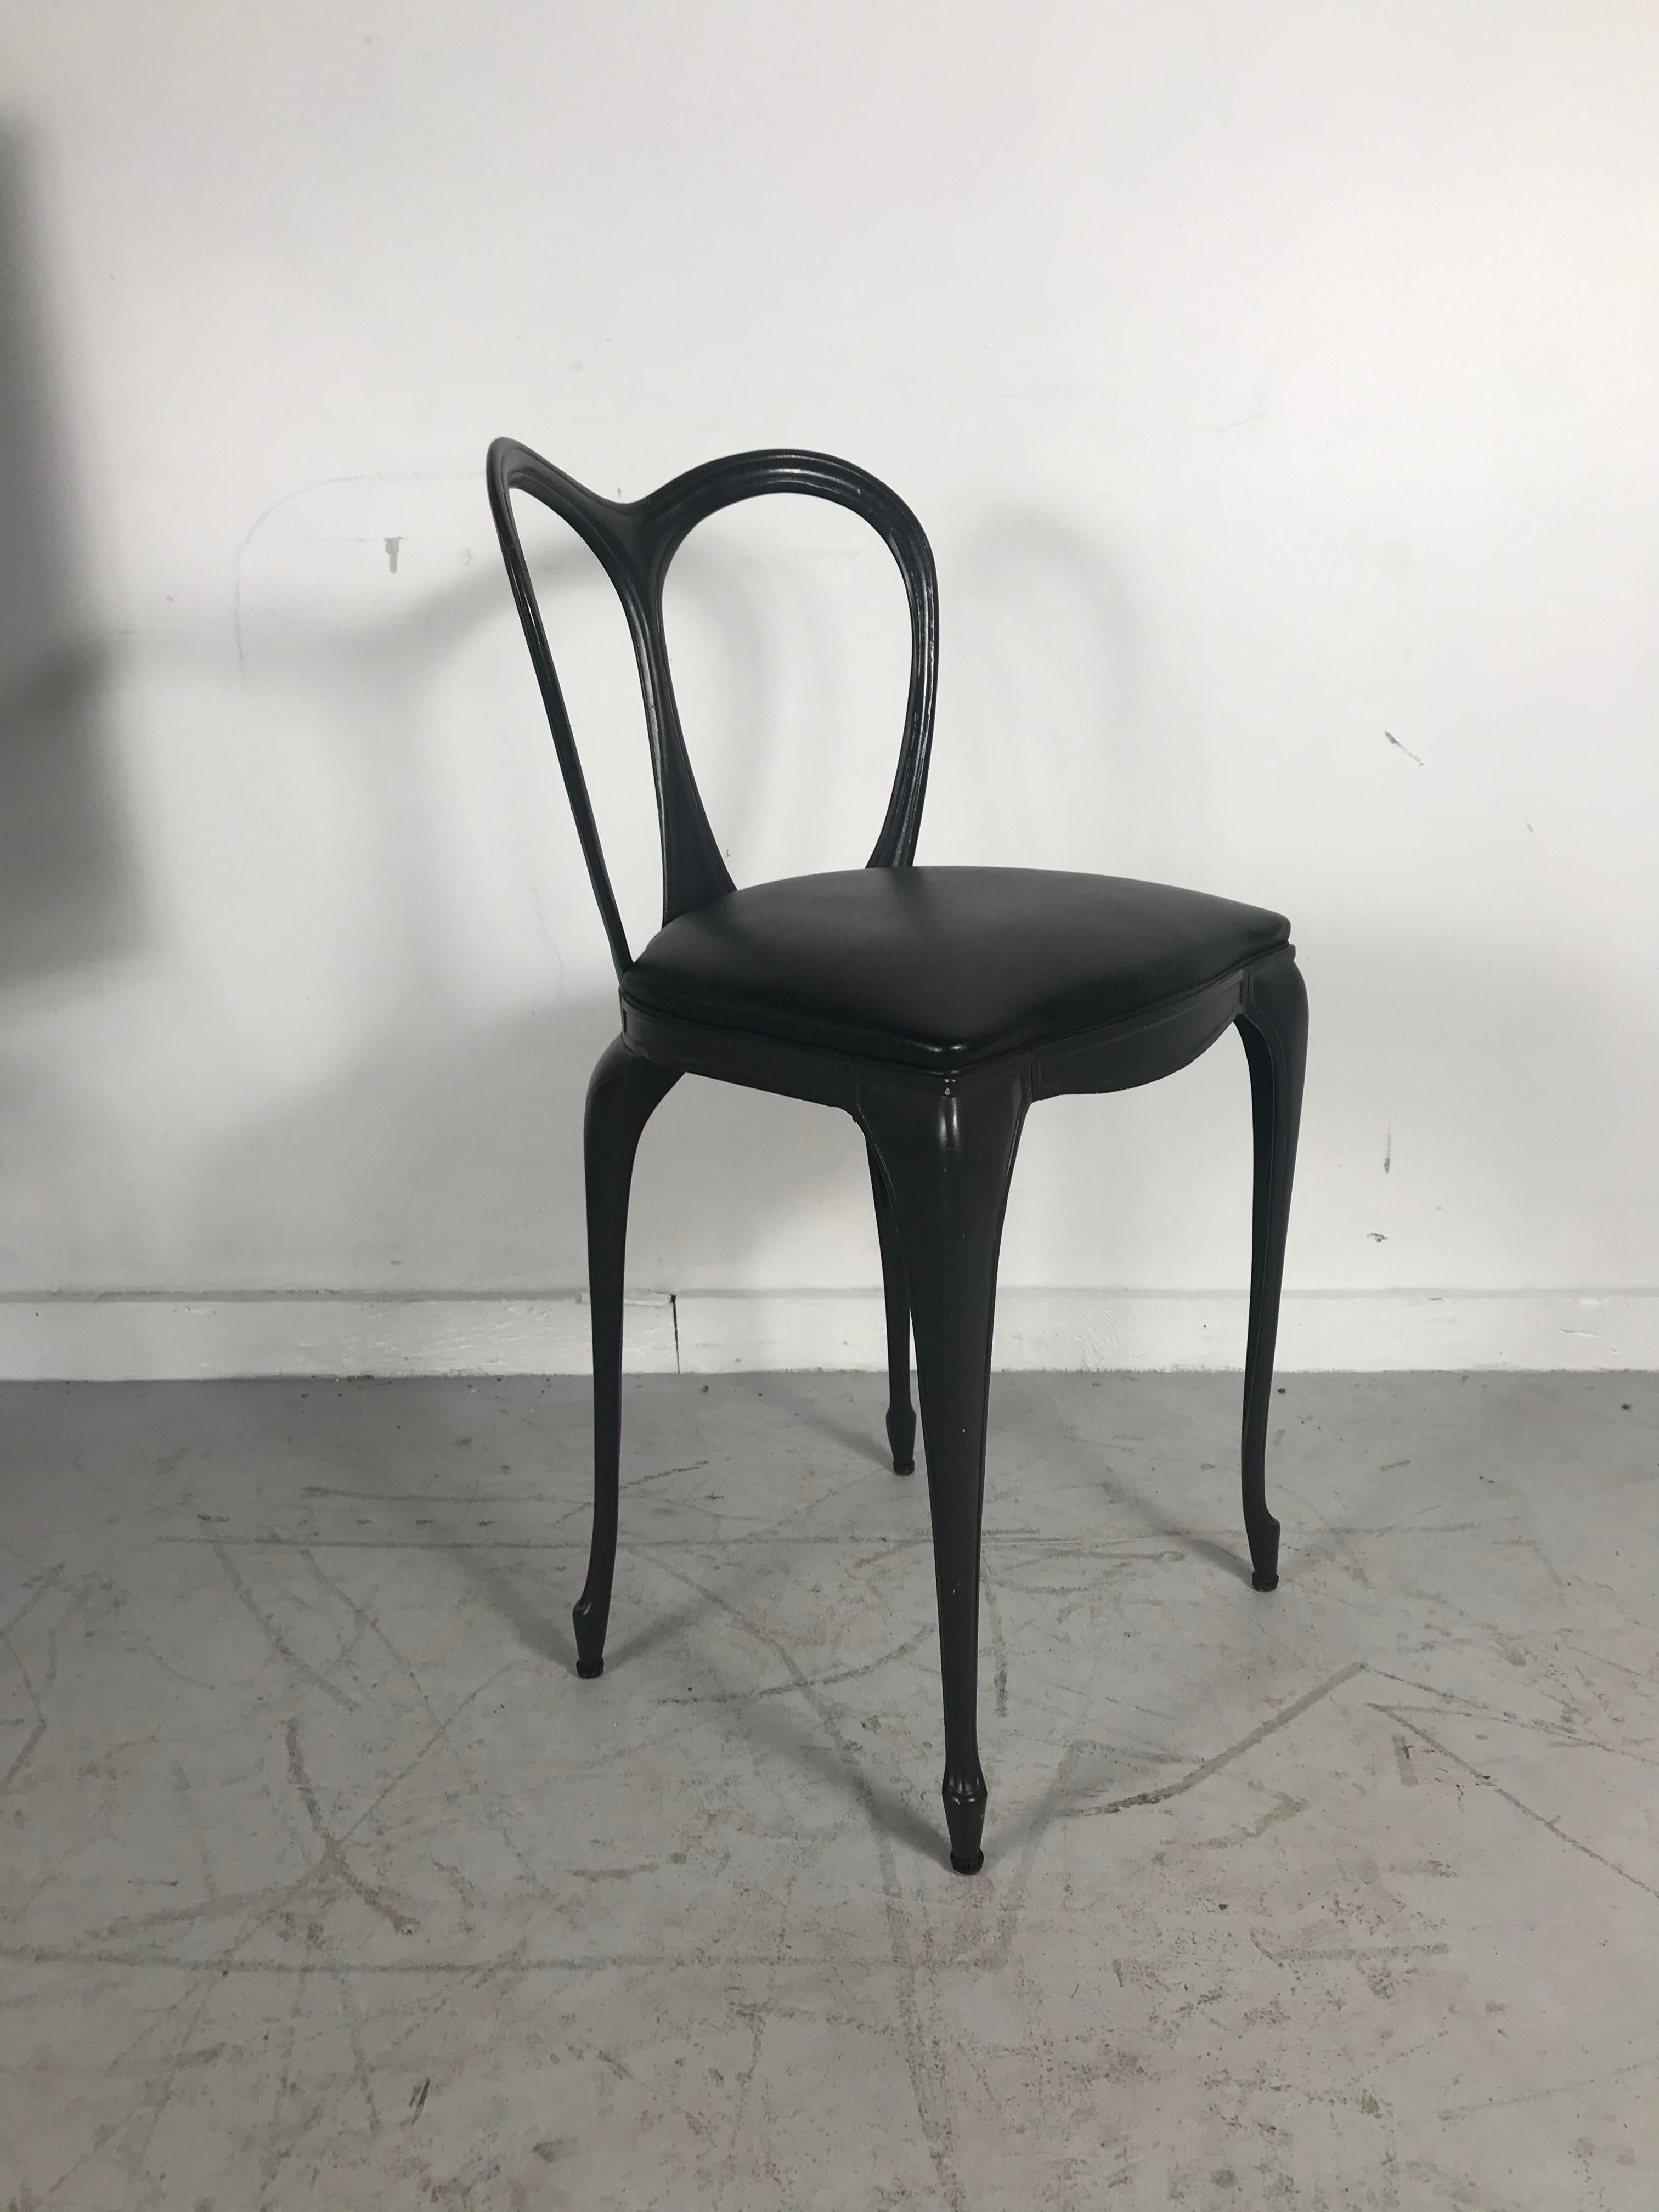 Art Nouveau style cast aluminum chair by Crucible Products Corp. 1960, amazing design, extremely comfortable, retains original dark gray Naugahyde seat as well as original paper label, unusual 21